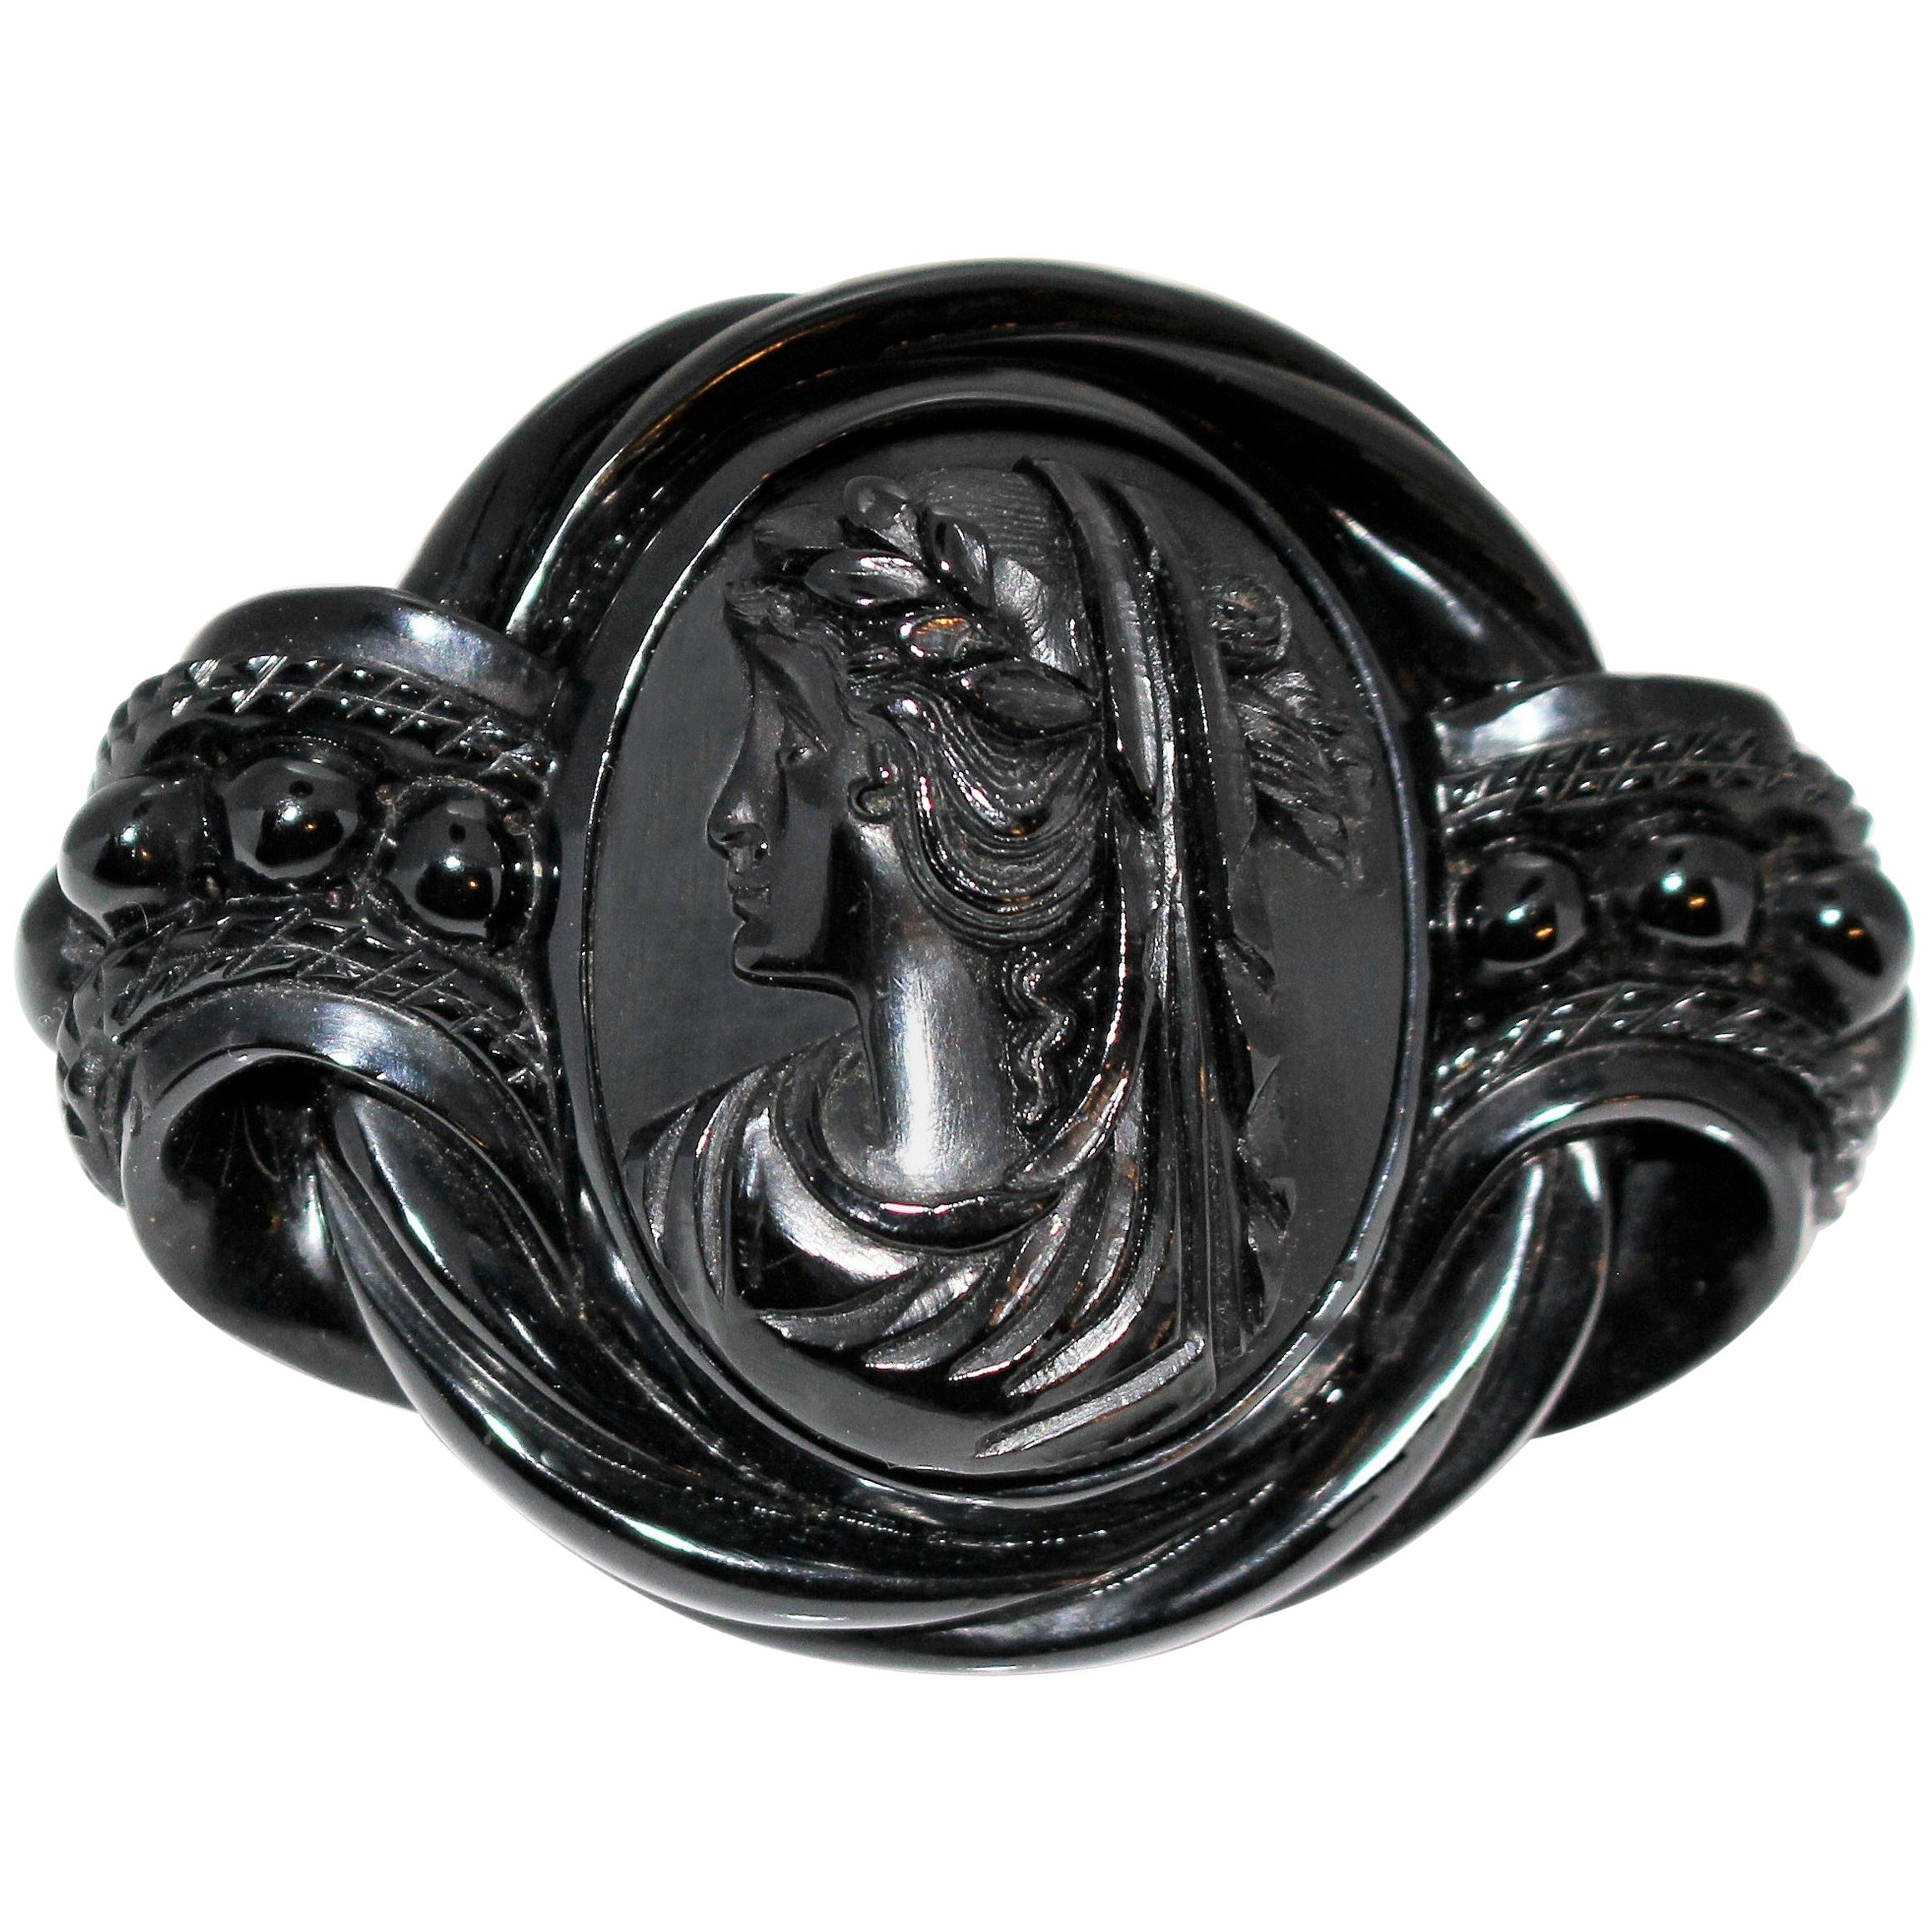 Circa 1880s Antique Whitby Jet Cameo Brooch